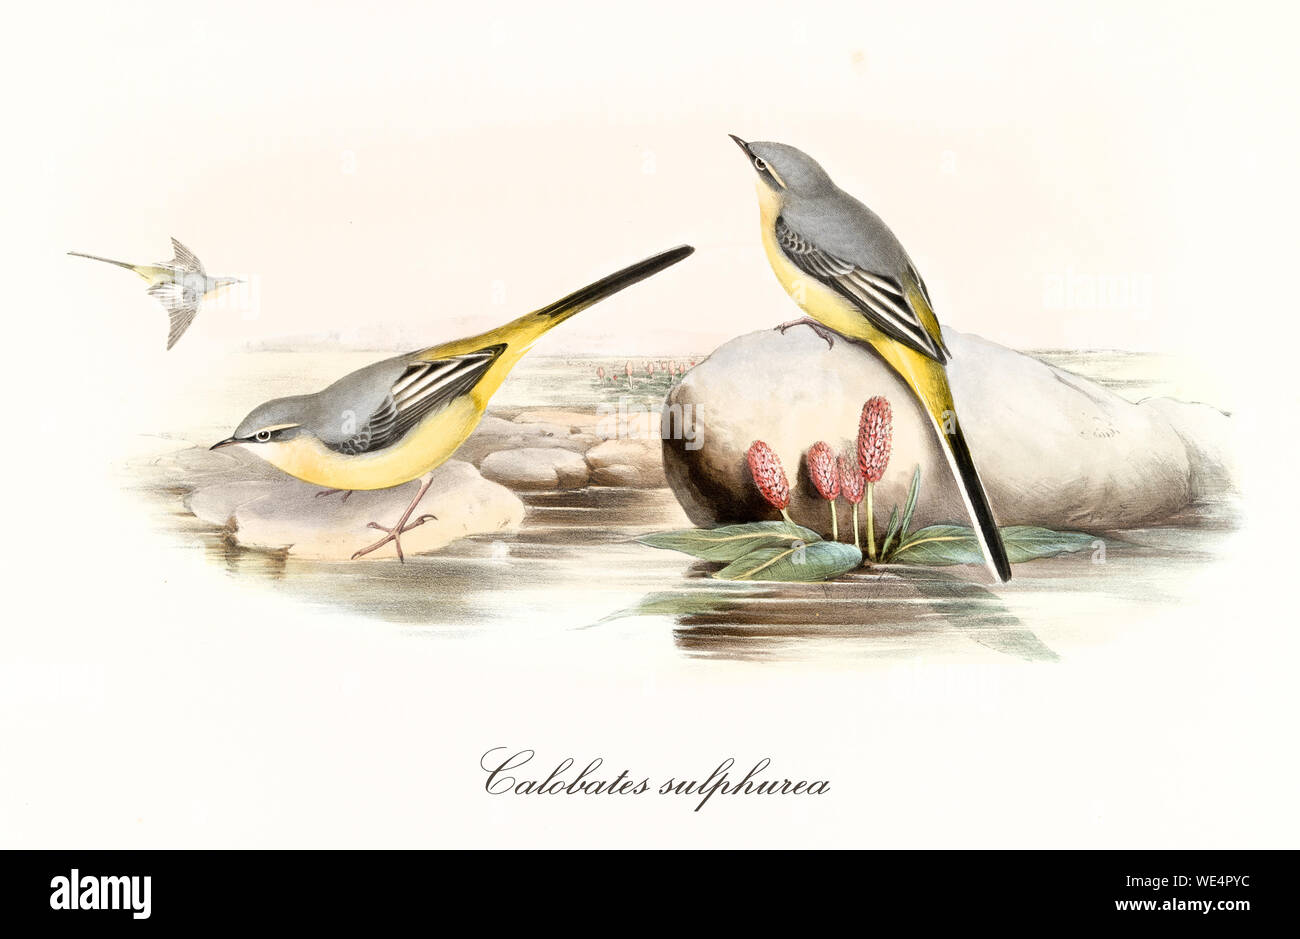 Two yellow and gray cute birds on a smooth rock partial immersed in a water surface. Old illustration of Grey Wagtail (Motacilla cinerea winter plumage). By John Gould publ. In London 1862 - 1873 Stock Photo